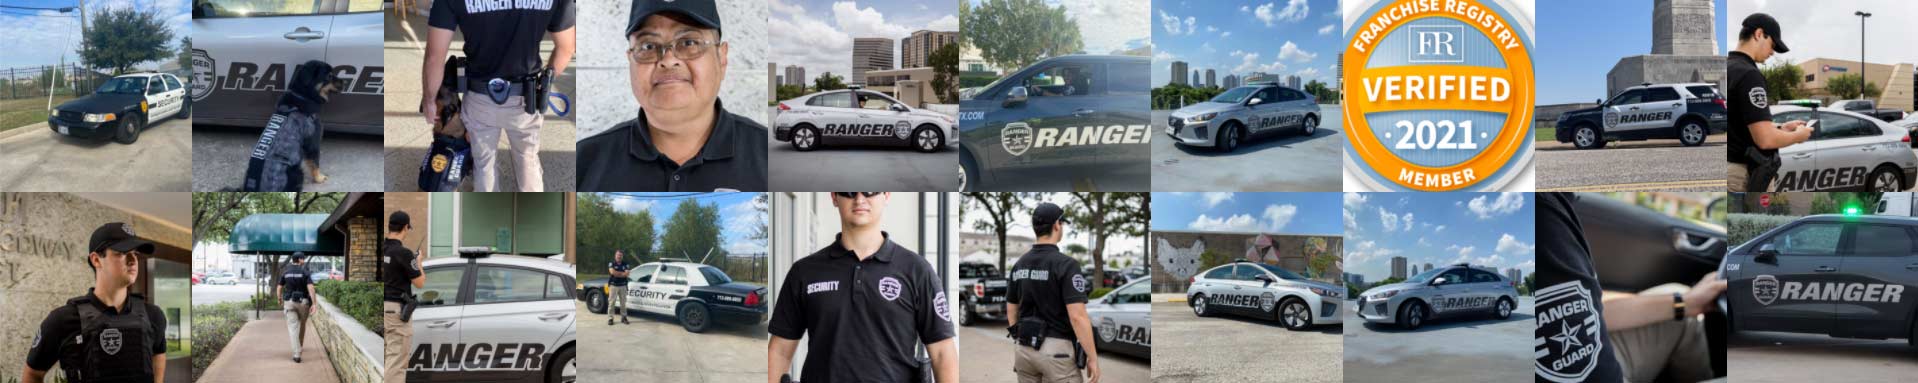 Ranger Guard and Investigations|Coral Gables